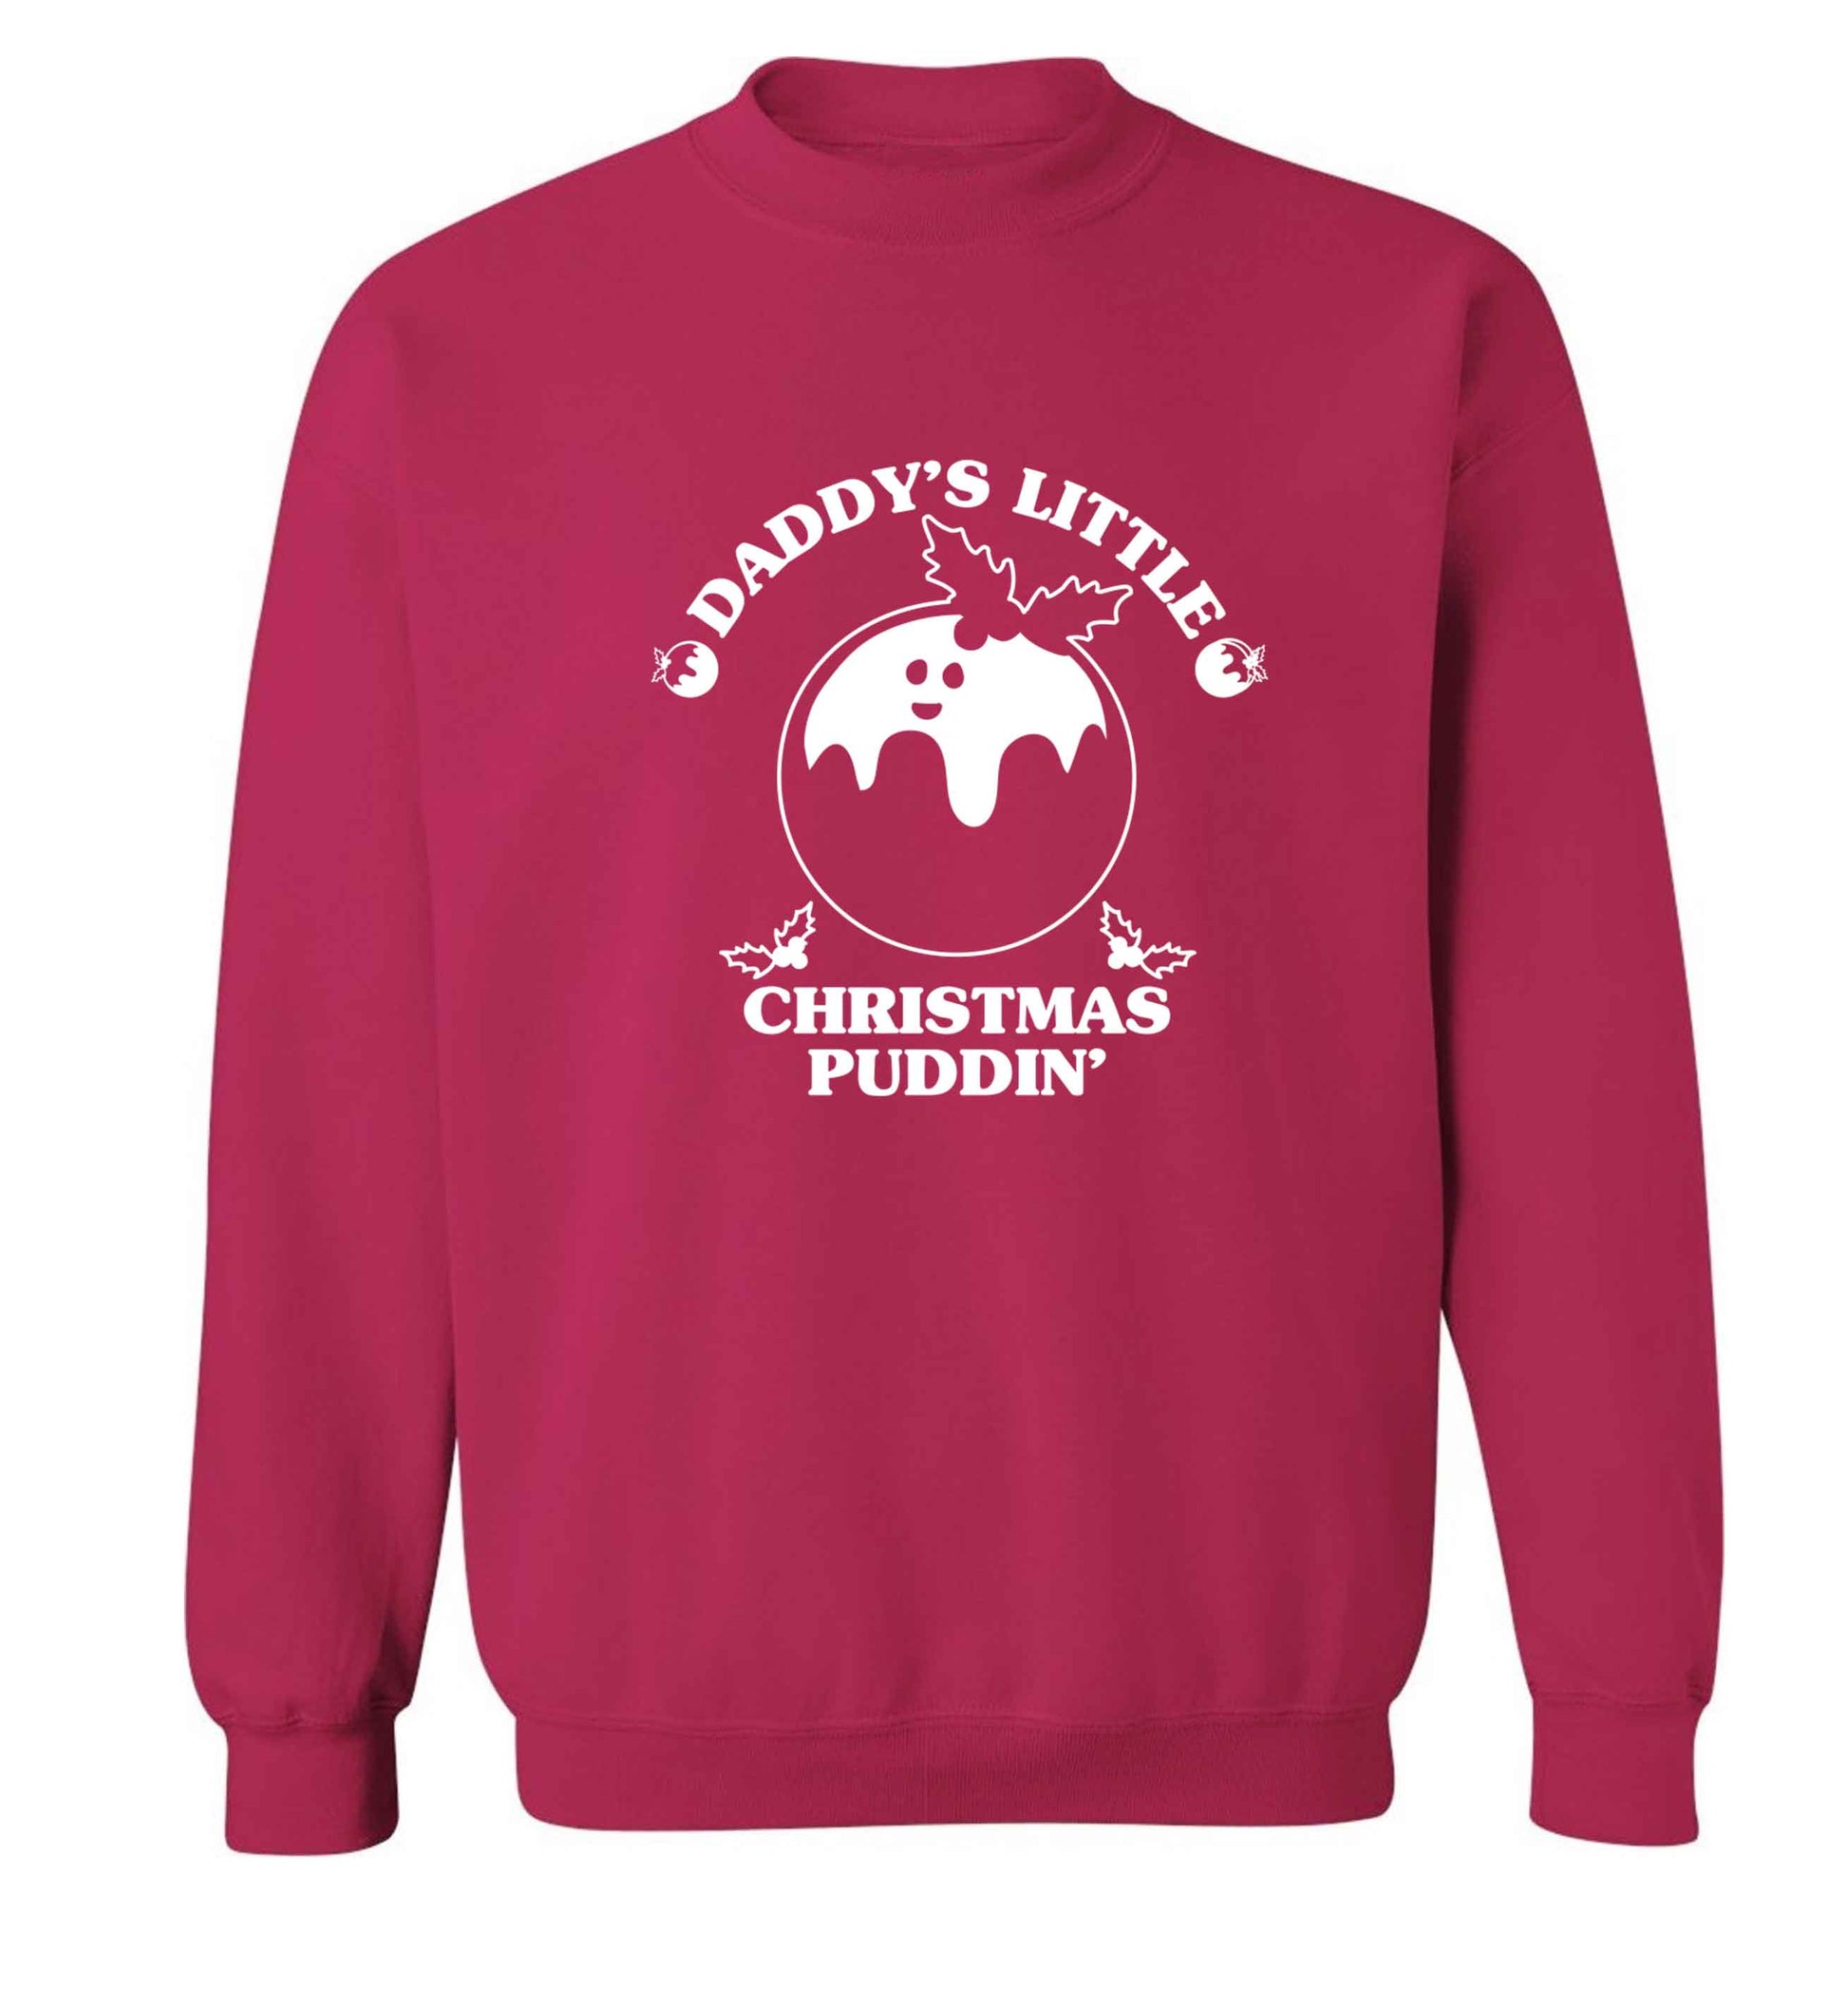 Daddy's little Christmas puddin' Adult's unisex pink Sweater 2XL